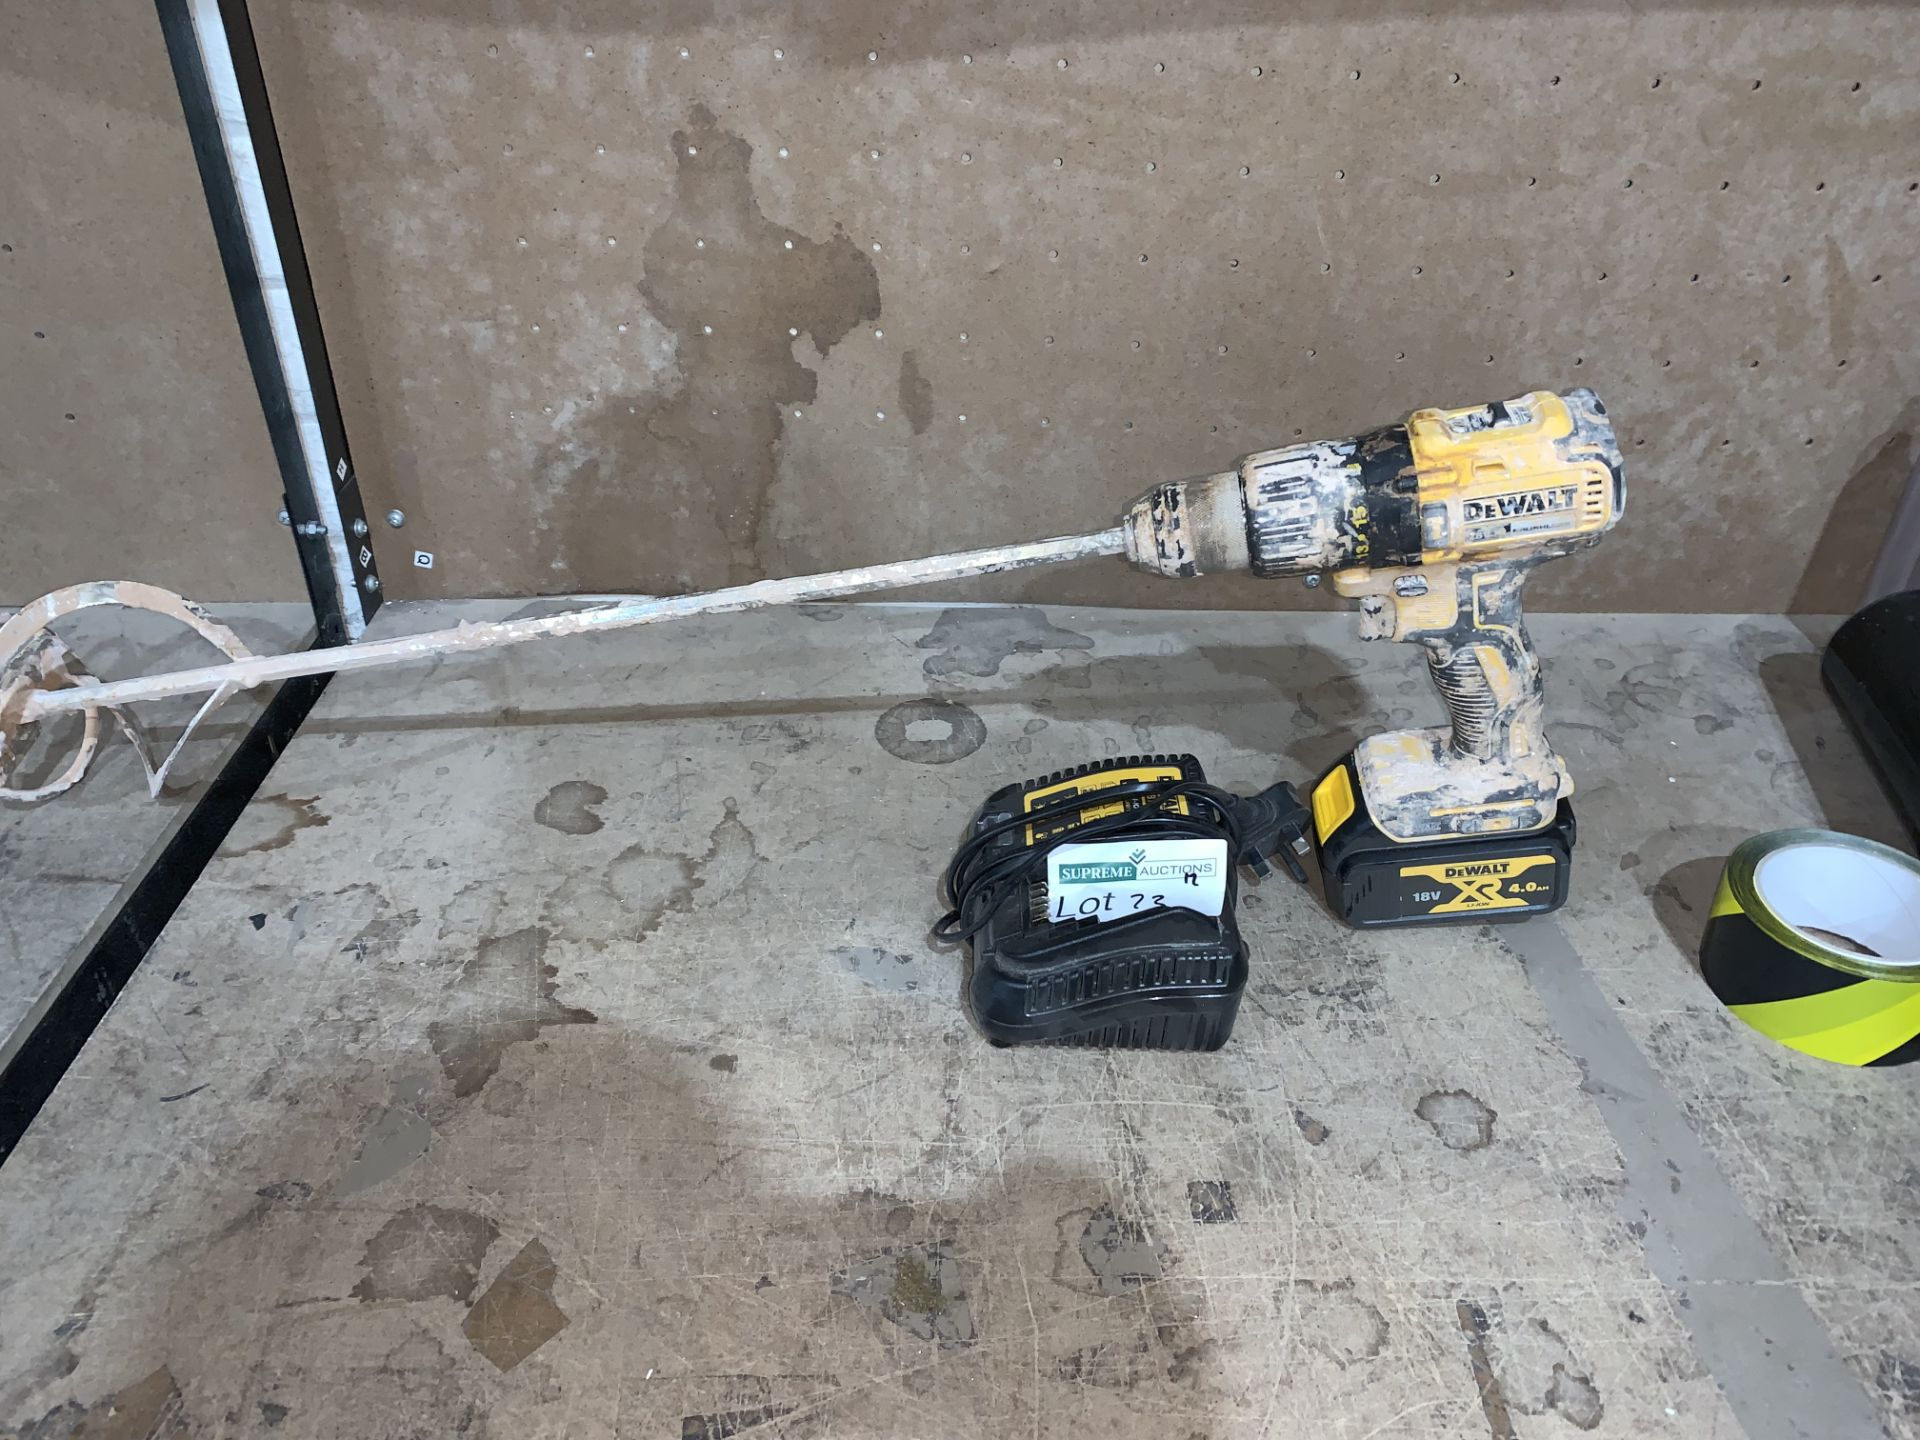 DEWALT CORDLESS BRUSHLESS COMBI DRILL COMES WITH BATTERY AND CHARGER (UNCHECKED, UNTESTED) PCK